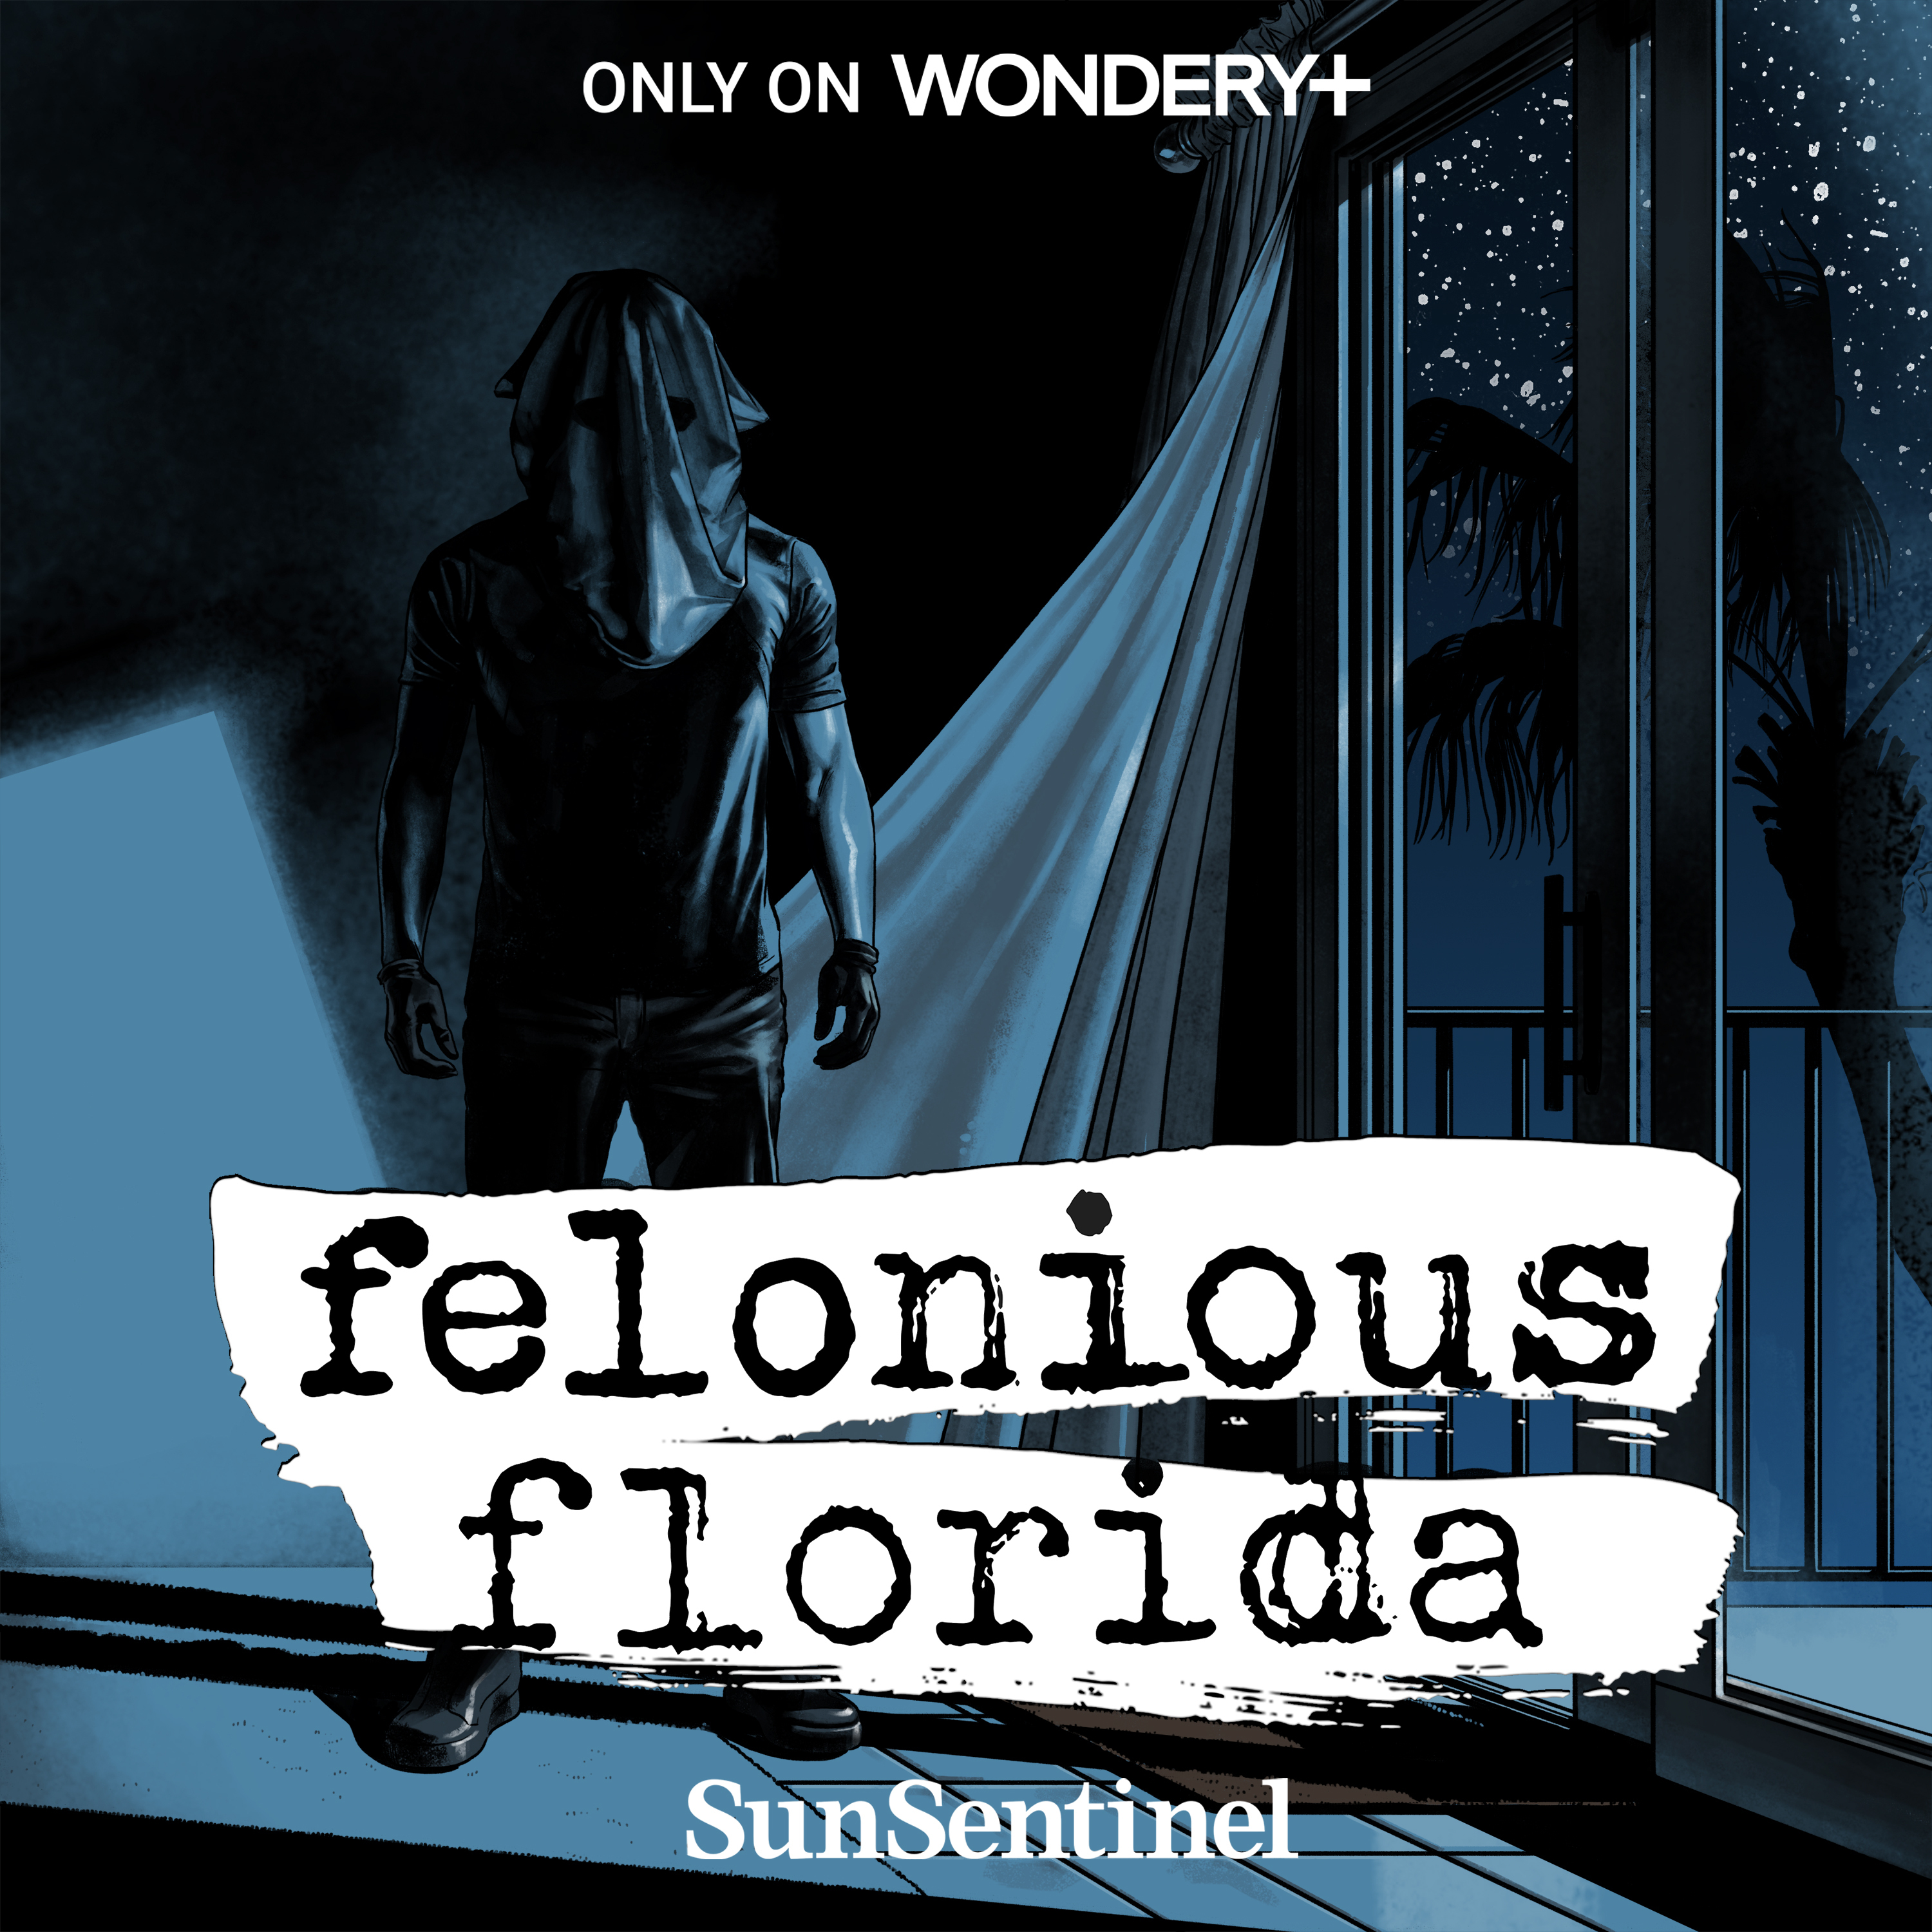 Introducing Felonious Florida: In the Darkness by Wondery | Sun Sentinel